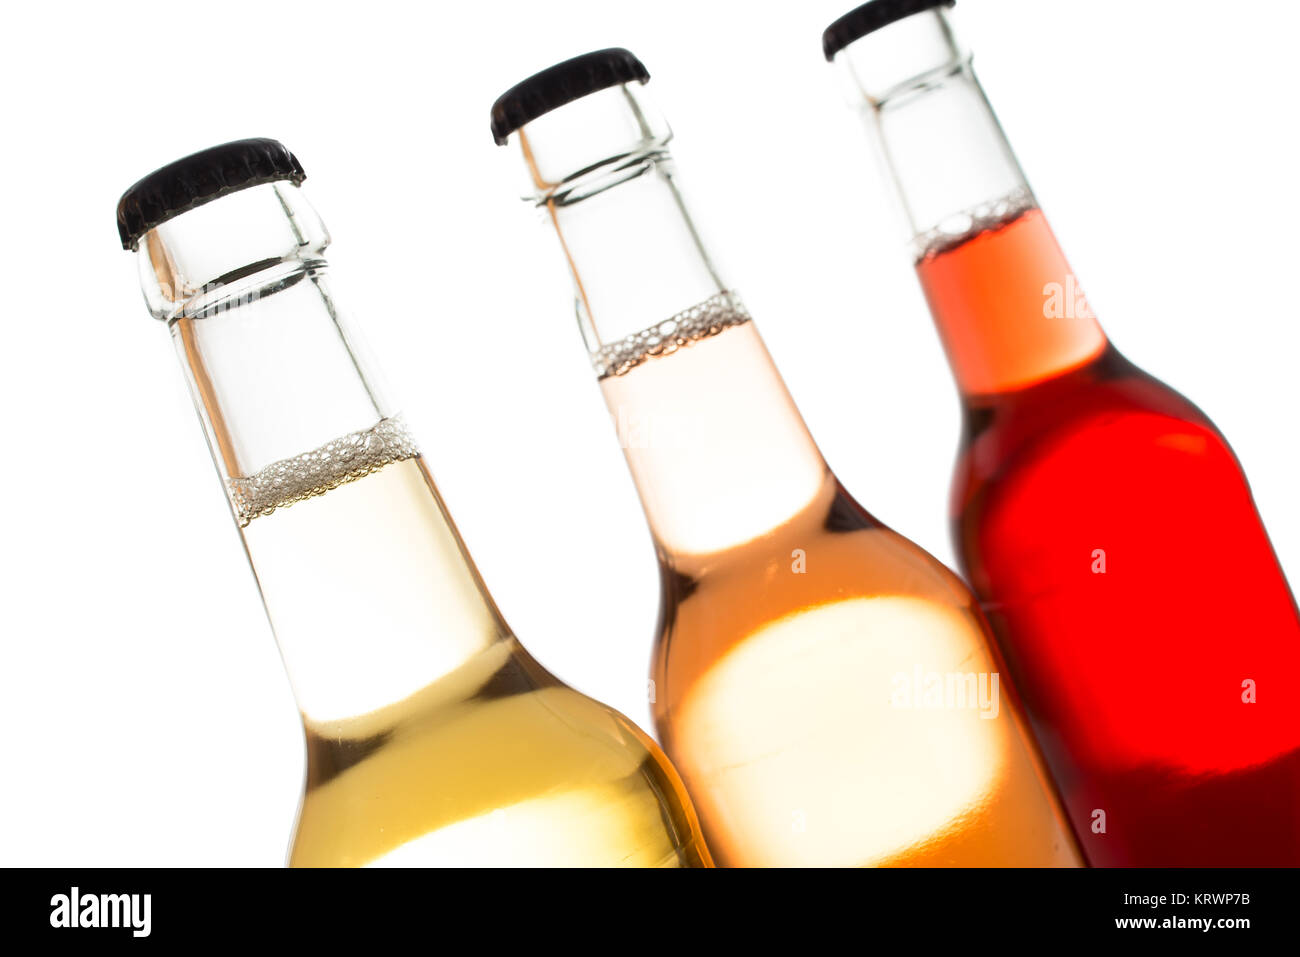 colourful sodas with pearls in bottles Stock Photo